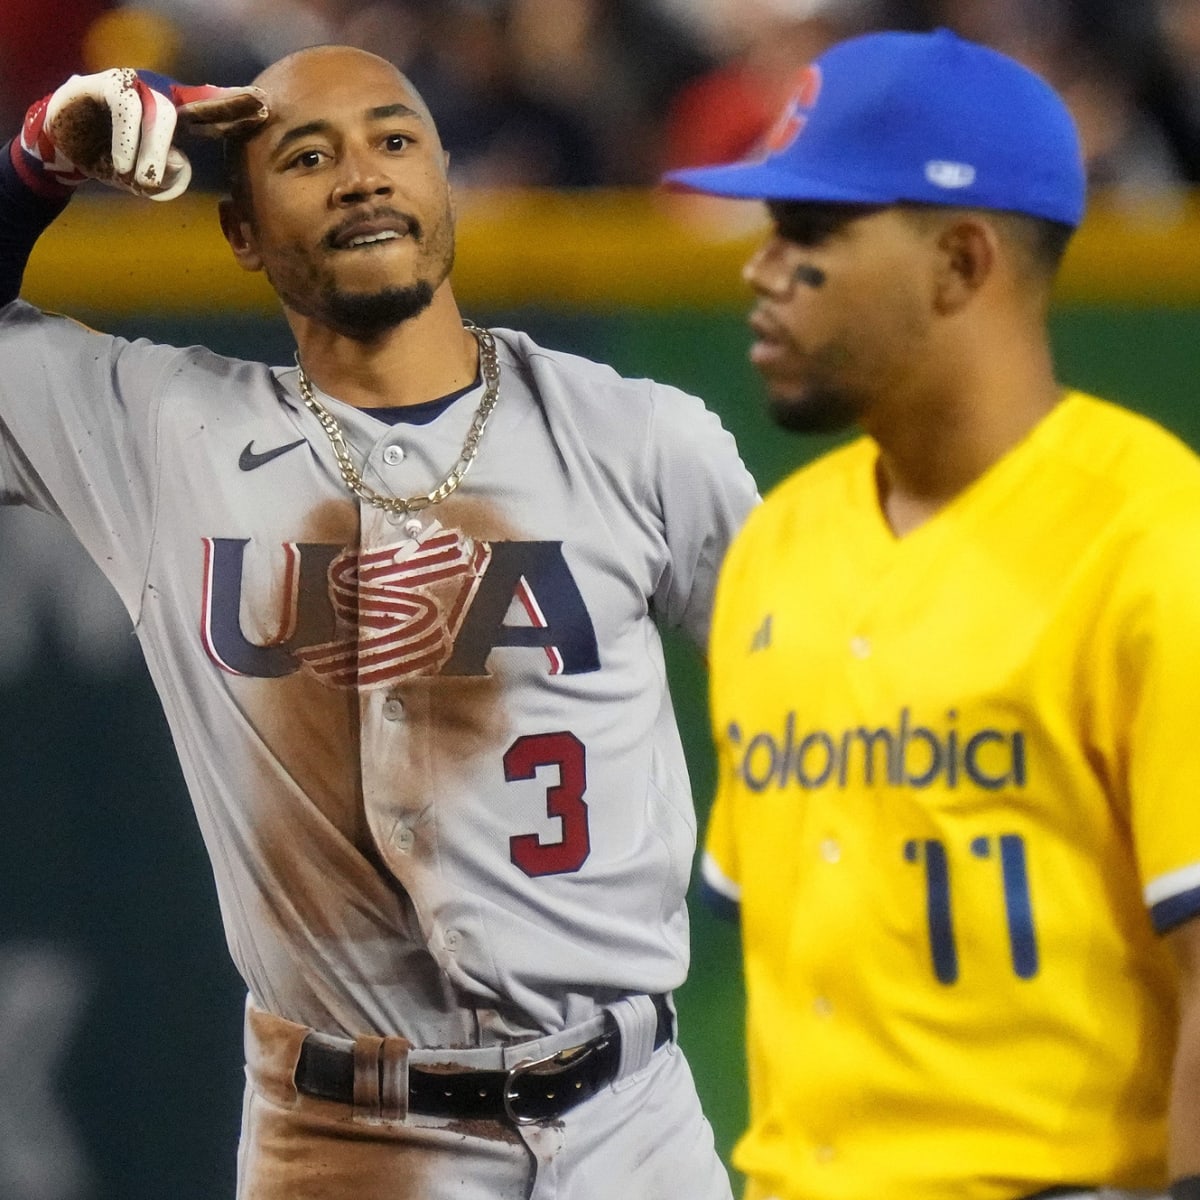 MLB - Mookie Betts has 2 World Series rings, and now he's #ALLIN to try to  get the gold for Team USA at the #WorldBaseballClassic.